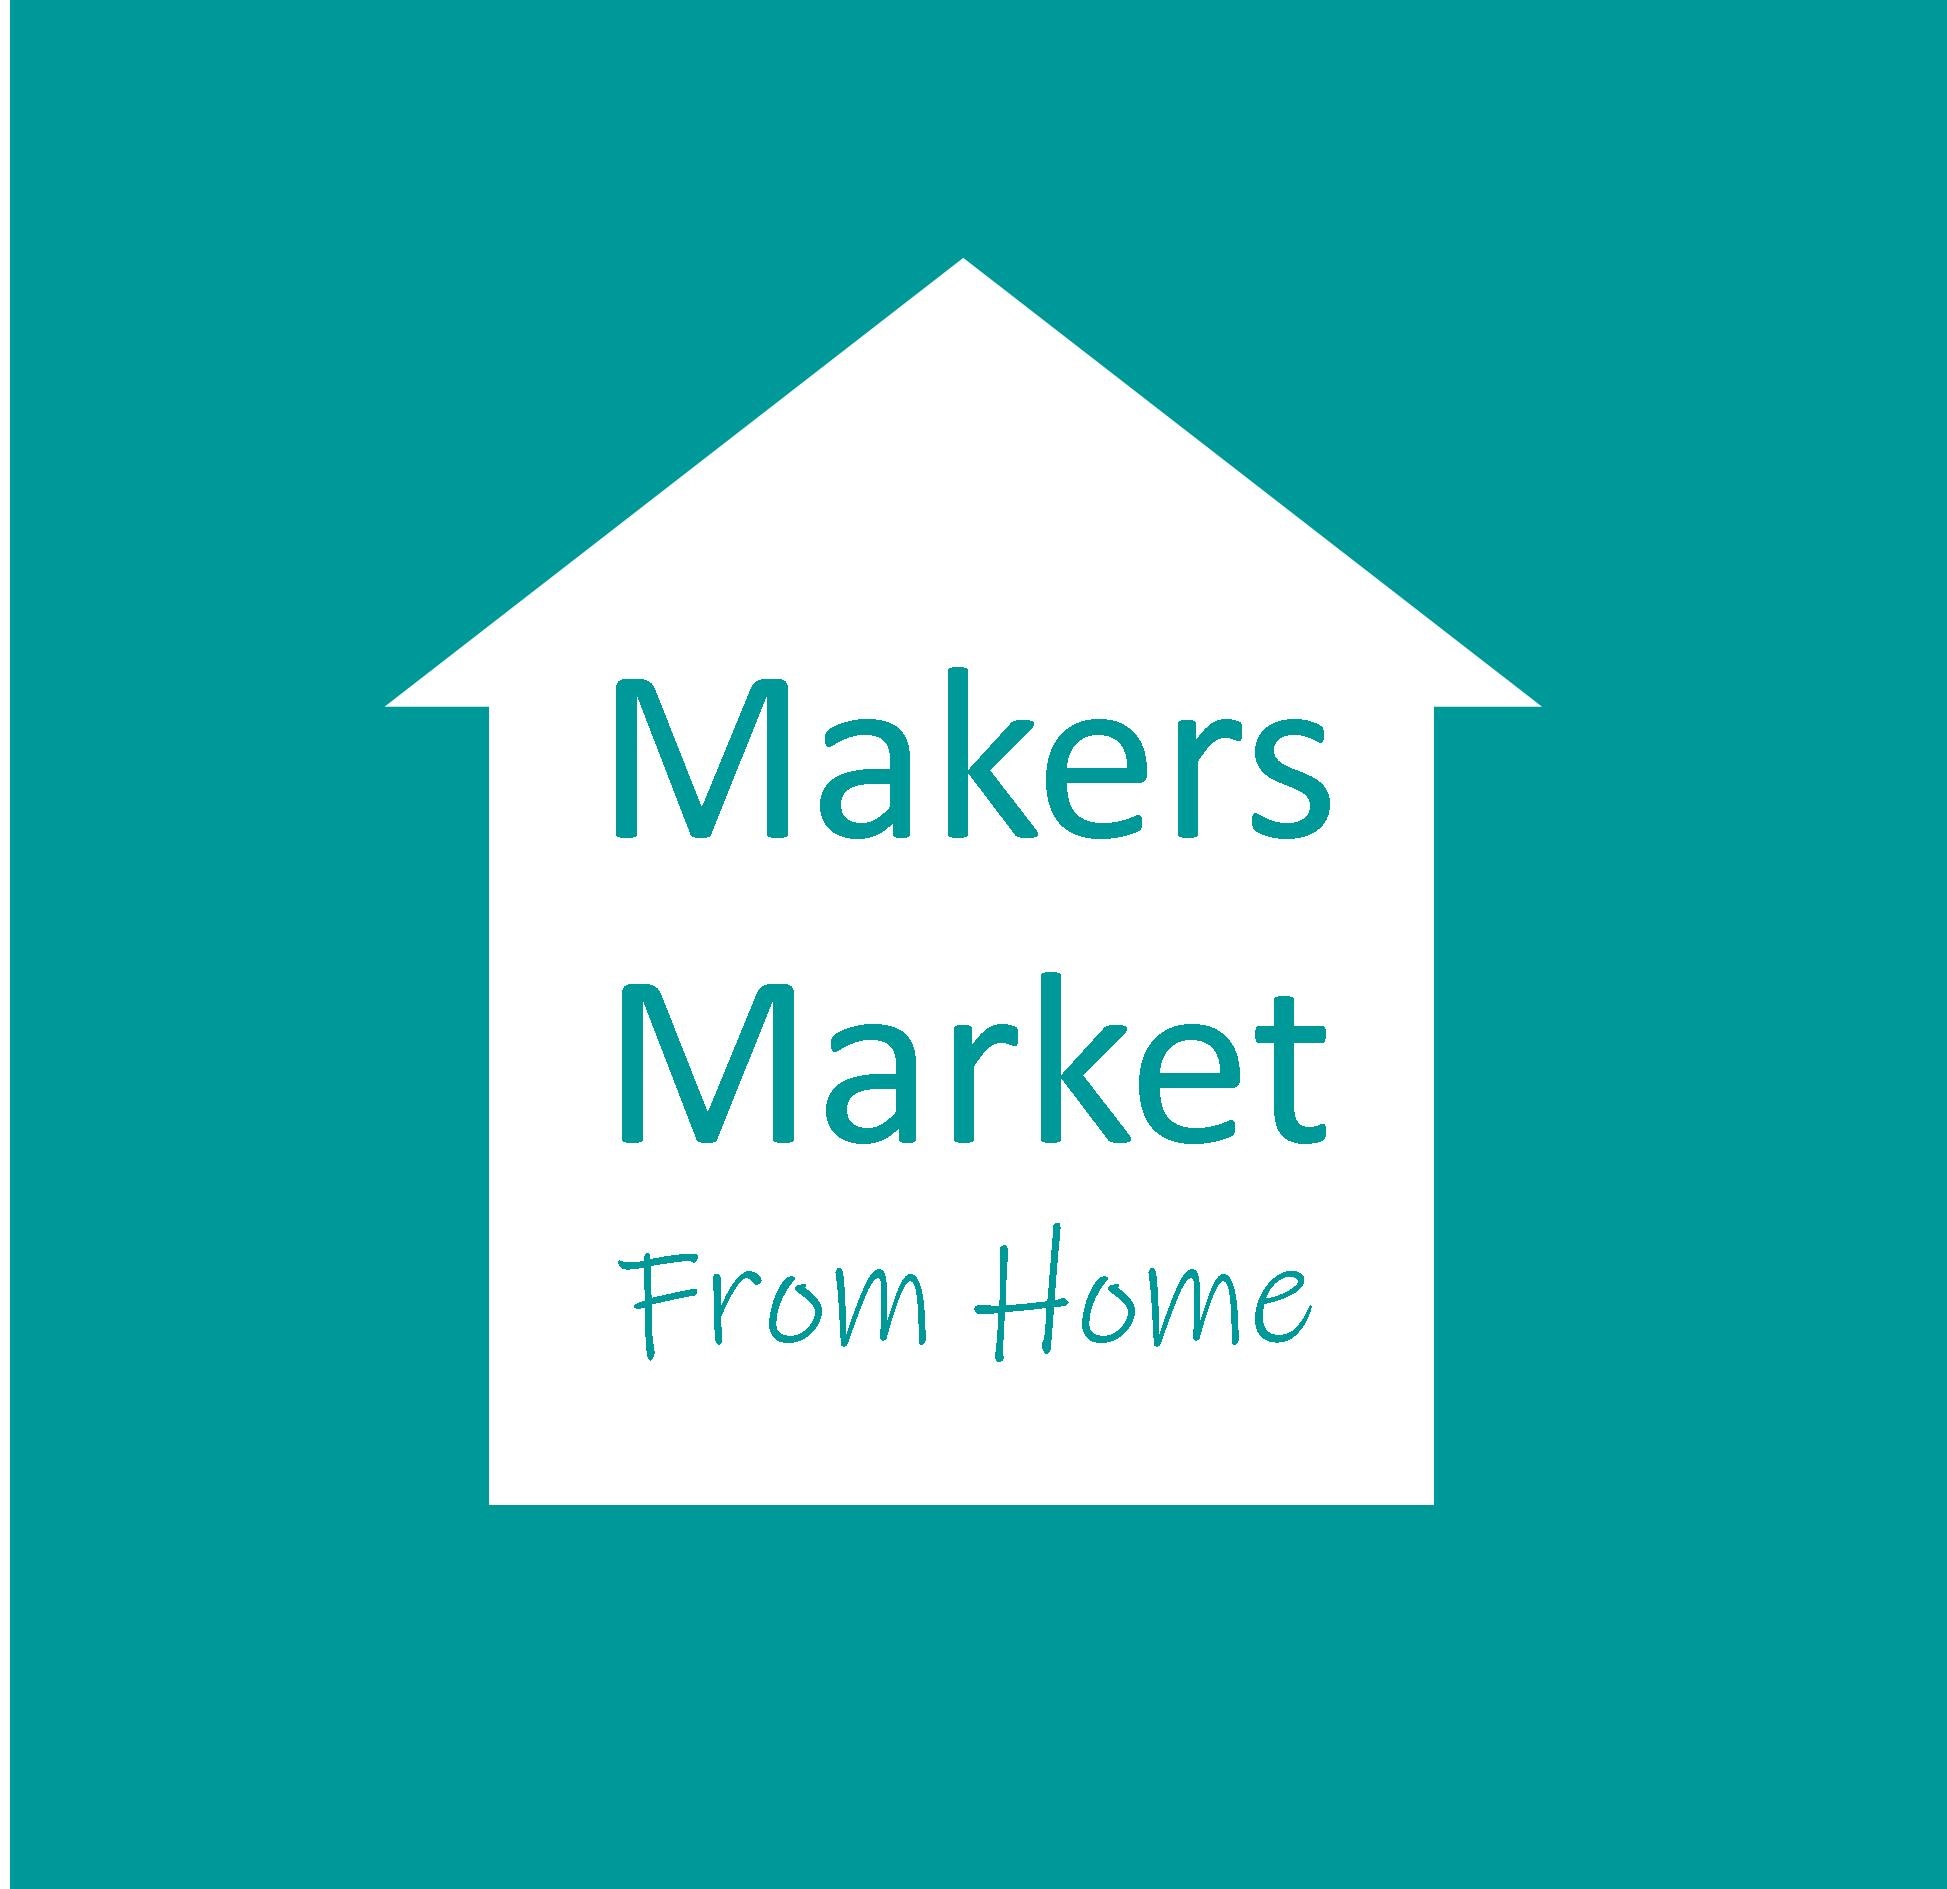 Makers Market from Home